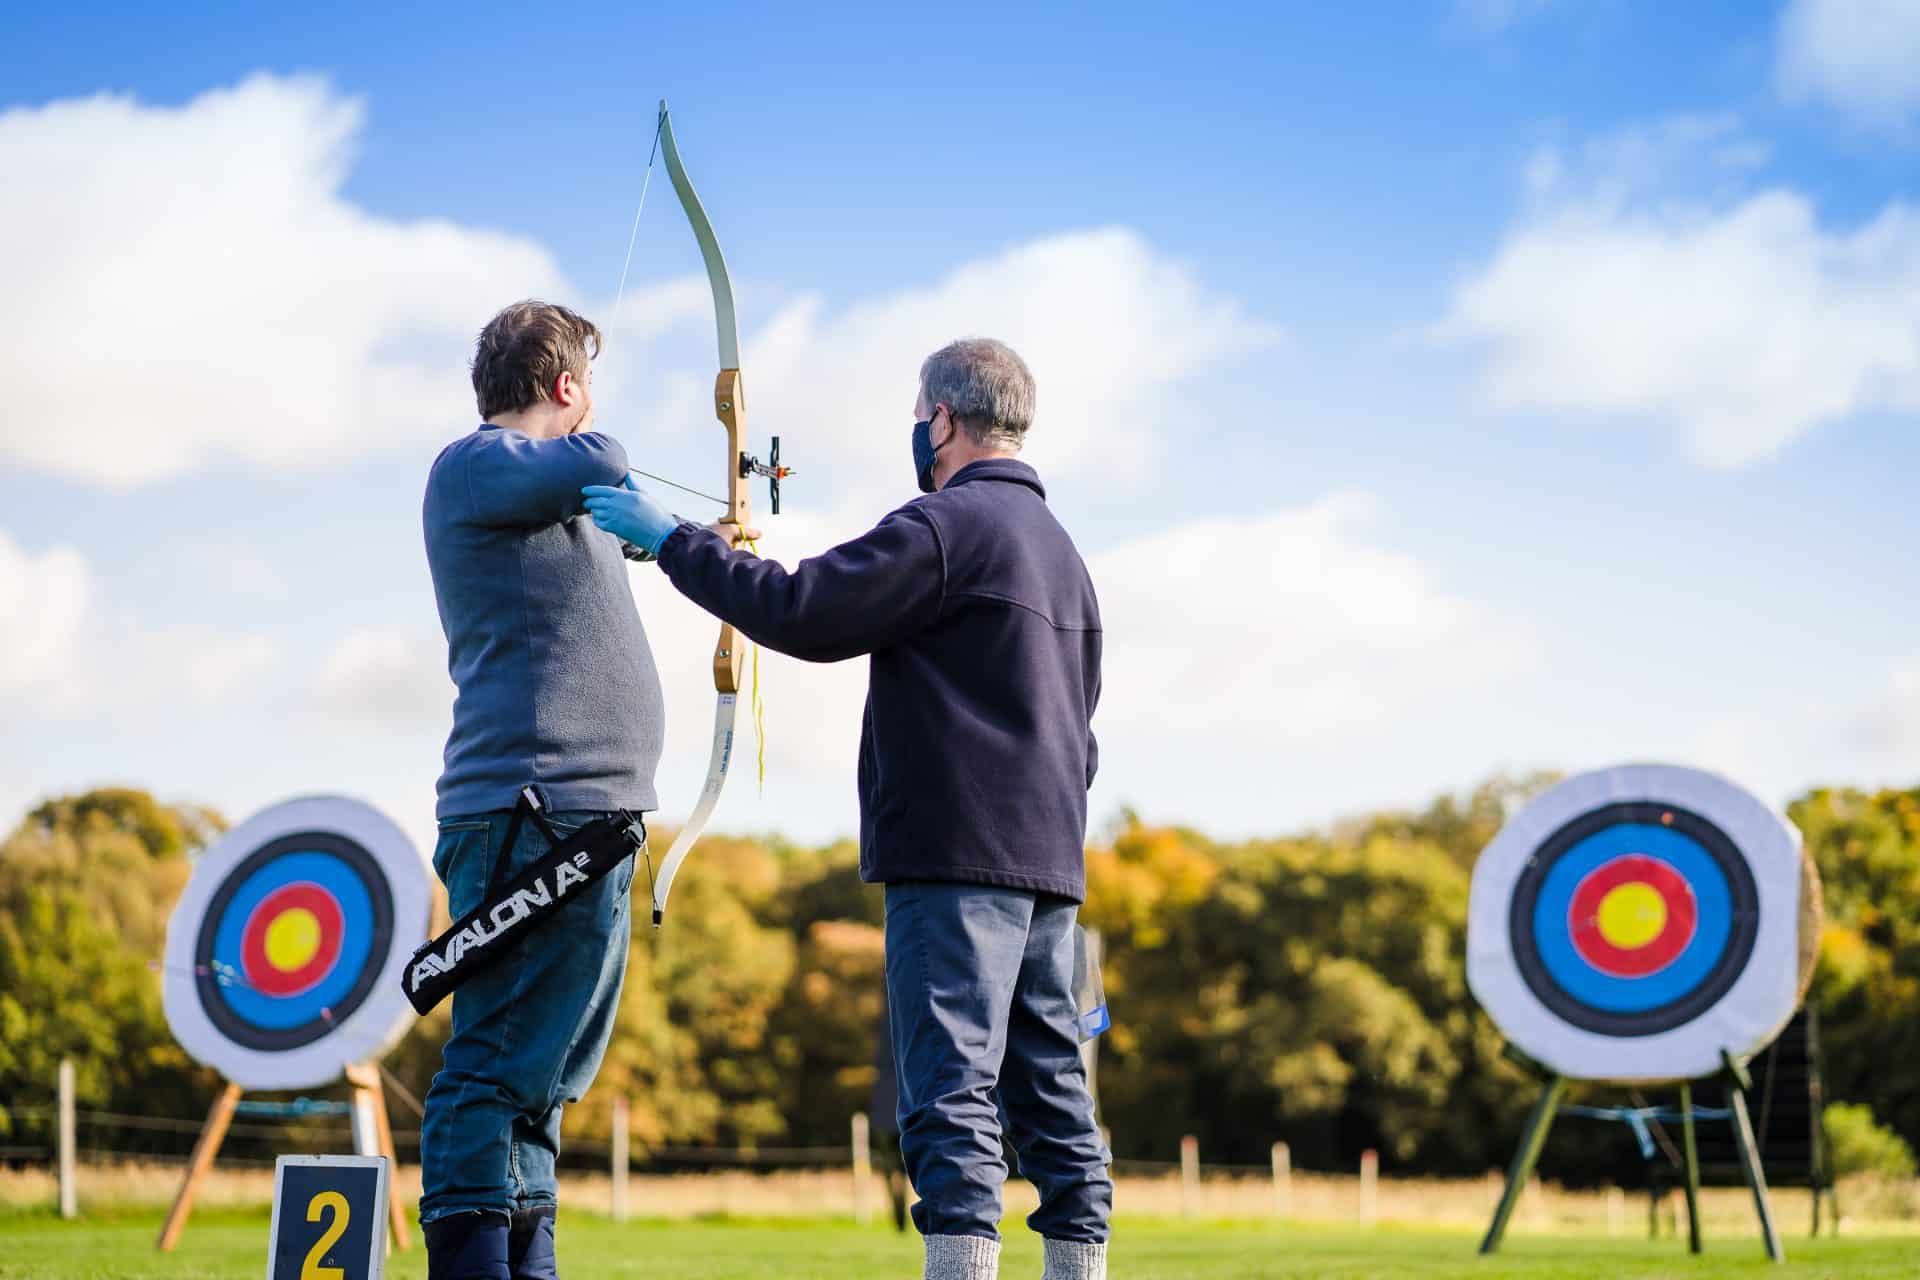 Join our webinars! Book now to learn archery coaching skills and more